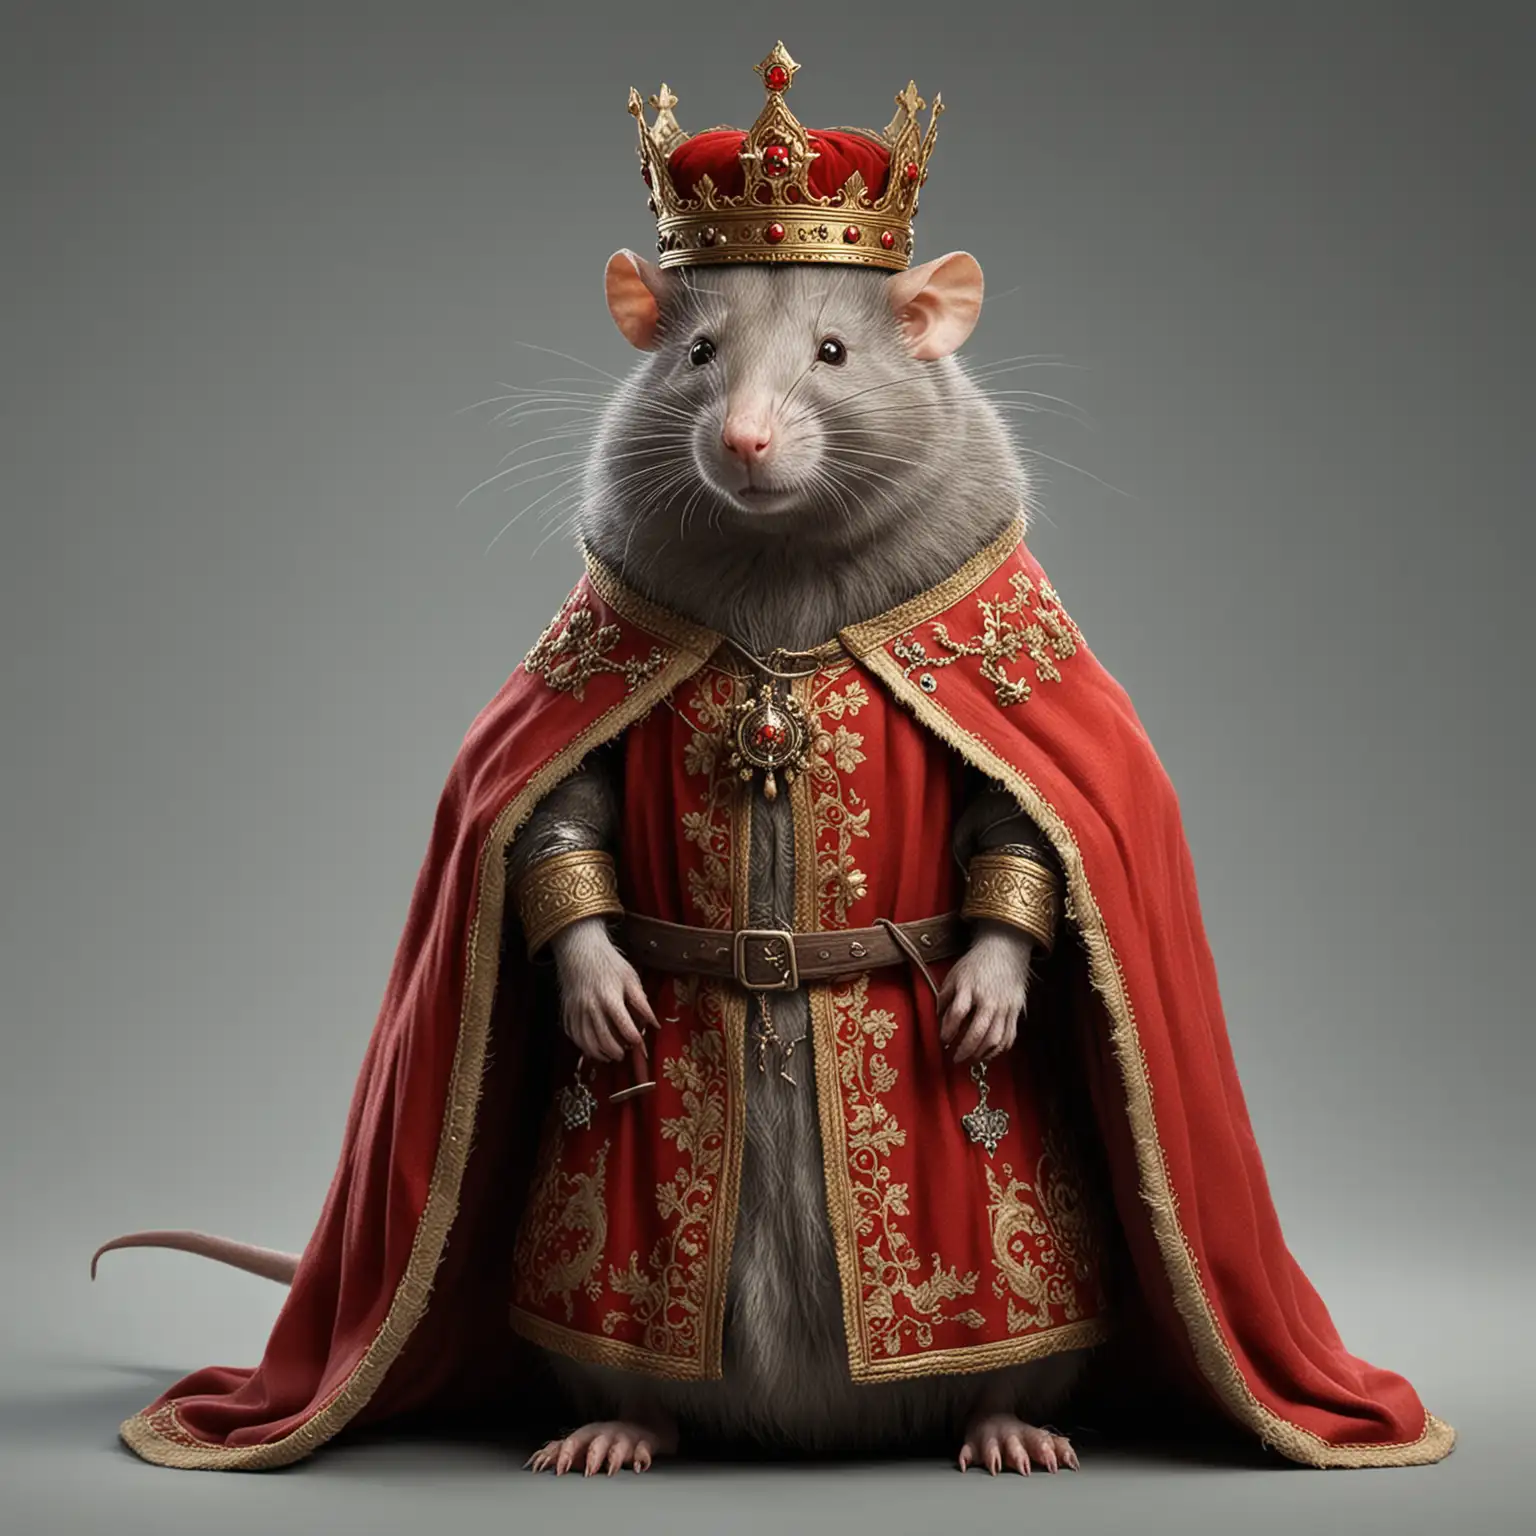 Realistic Cunning Rat King in Medieval Kings Attire